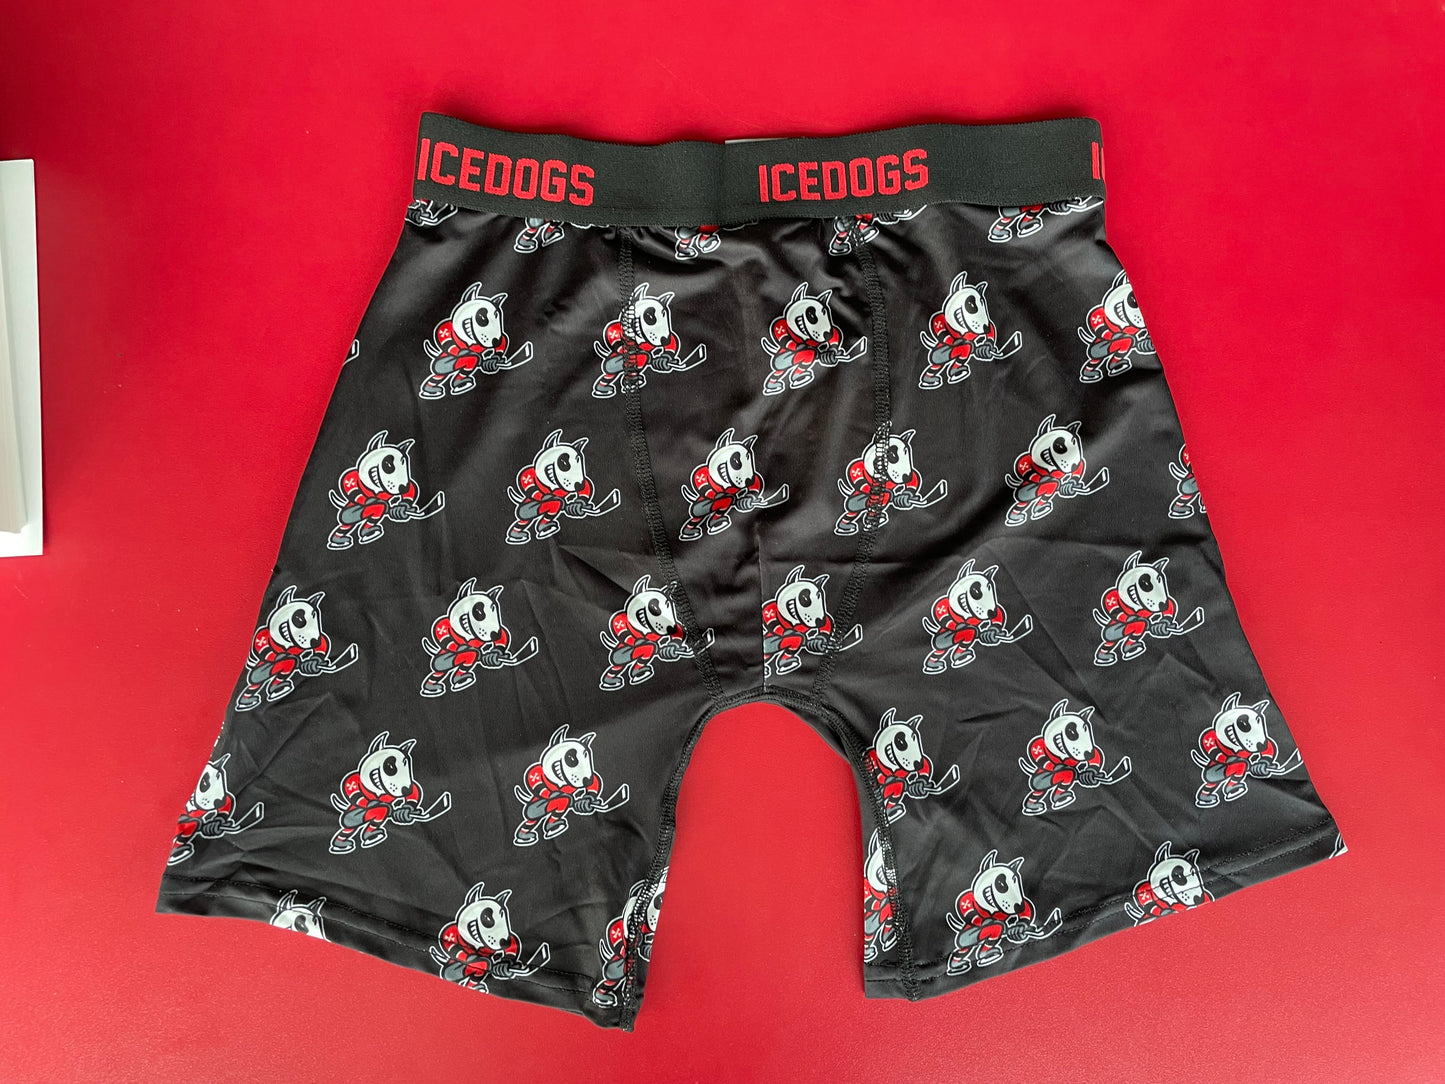 IceDogs Boxer Briefs